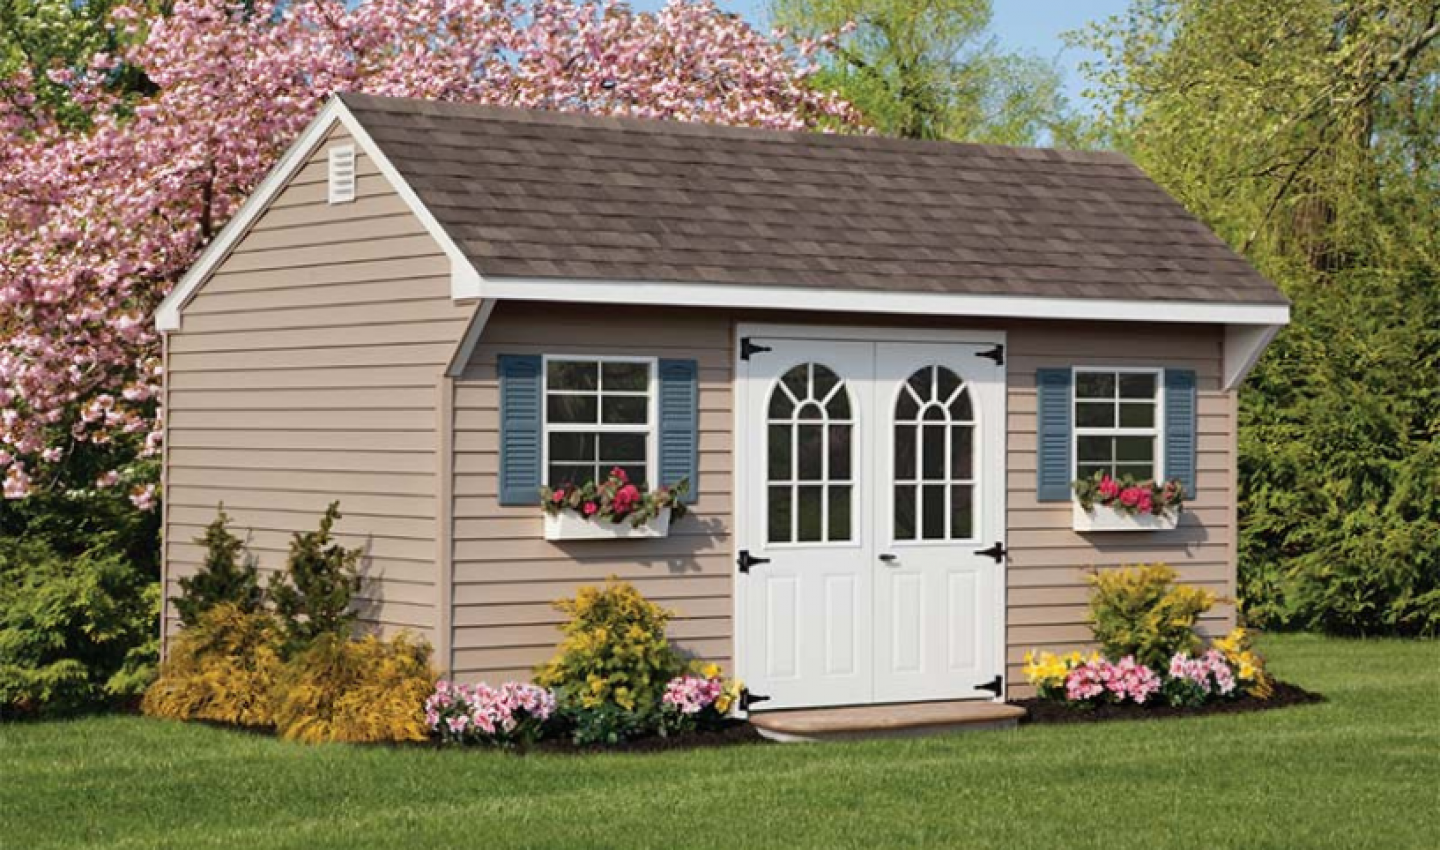 Sheds for Sale in Bergen County